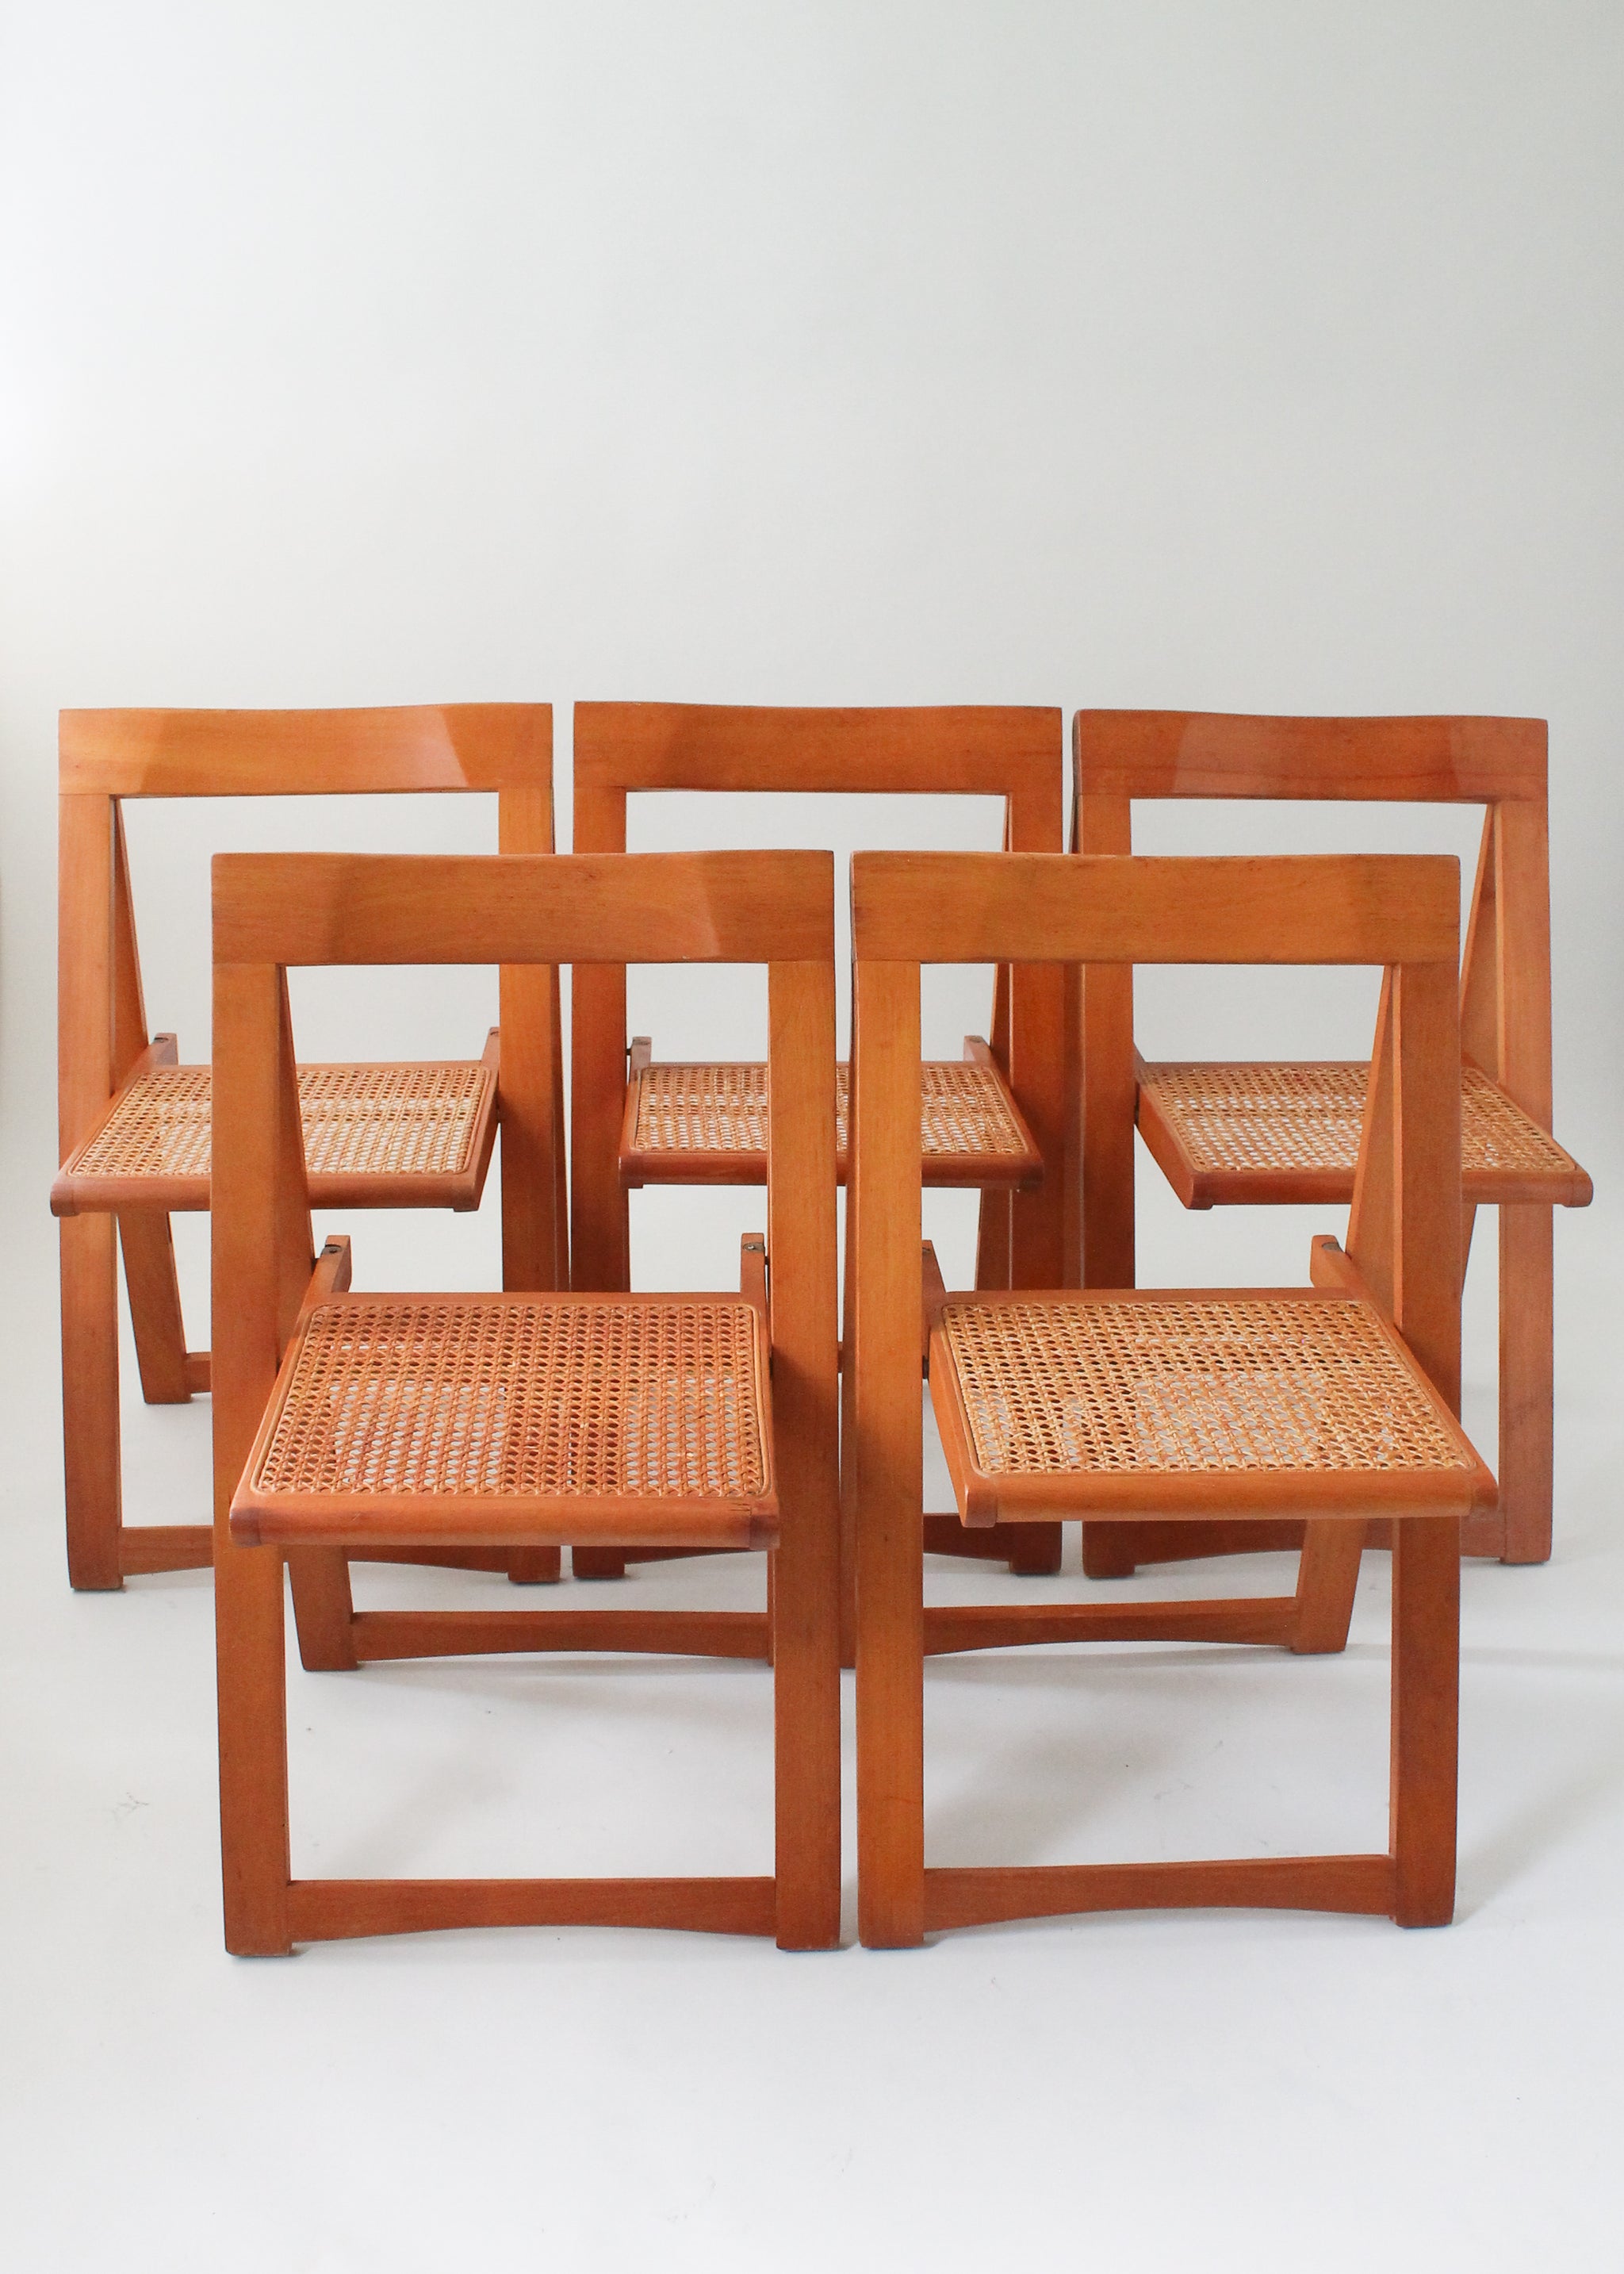 Vintage Folding Wooden Chairs  - Unfollow Wood Folding Chairs Vintage To Stop Getting Updates On Your Ebay Feed.